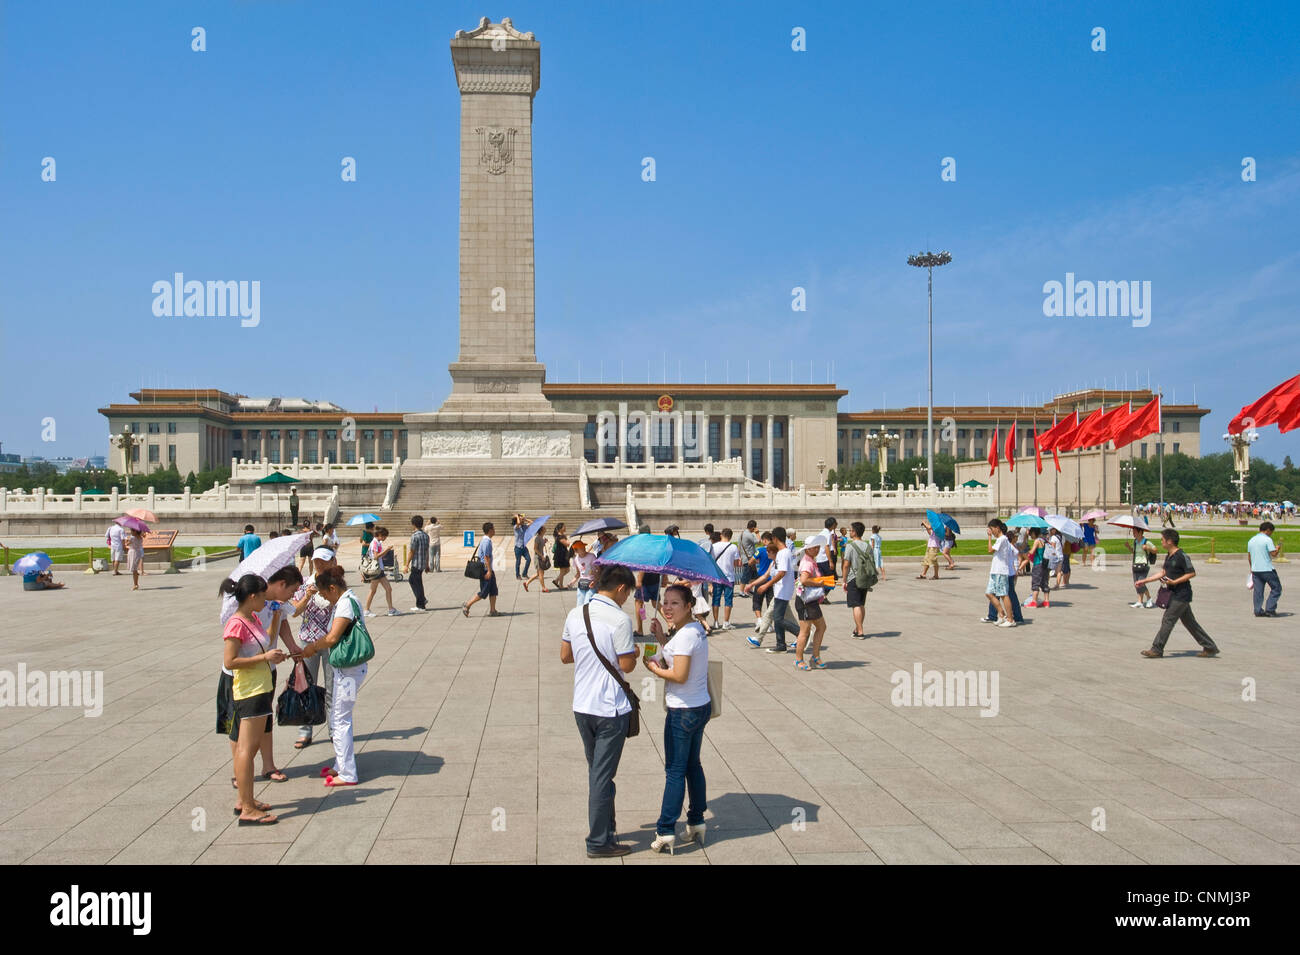 Chinese tourists in Tiananmen Square with The Monument to the People's Heroes and Great Hall of the People in the background. Stock Photo